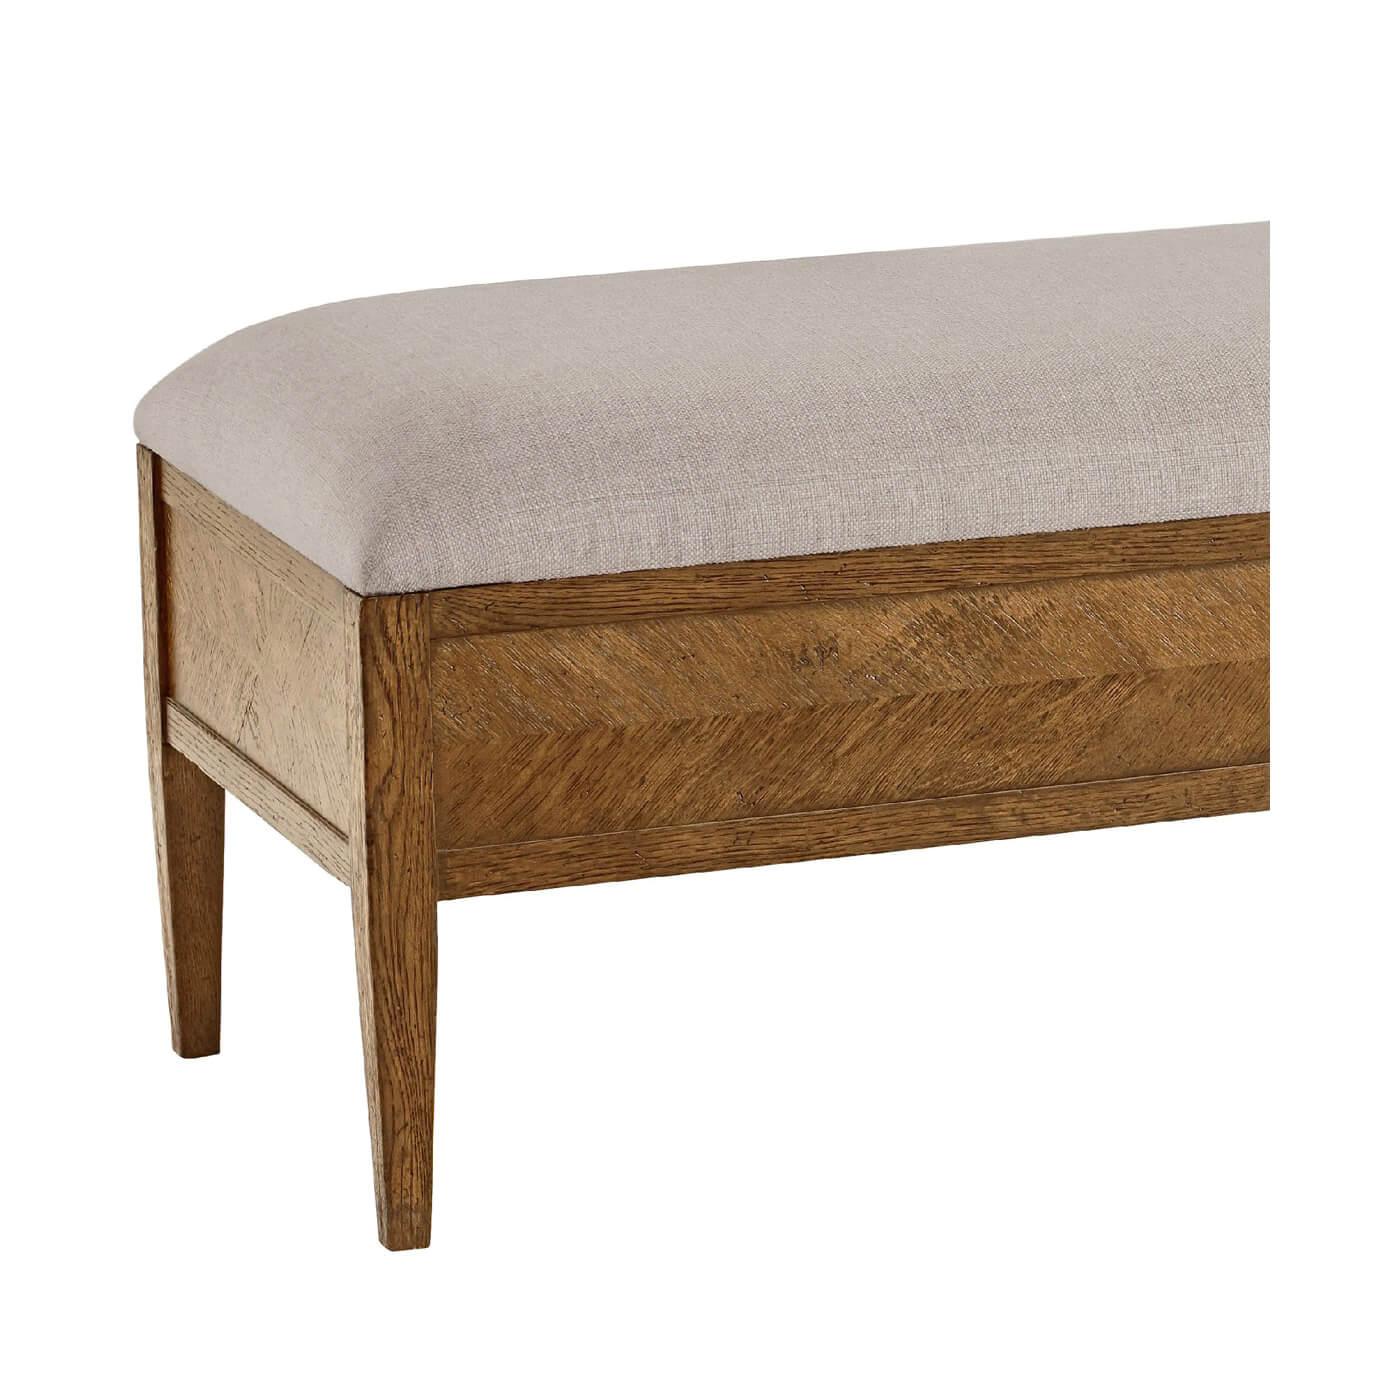 A Light oak parquetry upholstered bench with tapered legs. Crafted with rustic oak with an upholstered seat, this bench is the perfect addition to the foot of any bed or entryway. 
Shown in Dawn Finish
Shown in Linen-UP5409 fabric
Dimensions
62